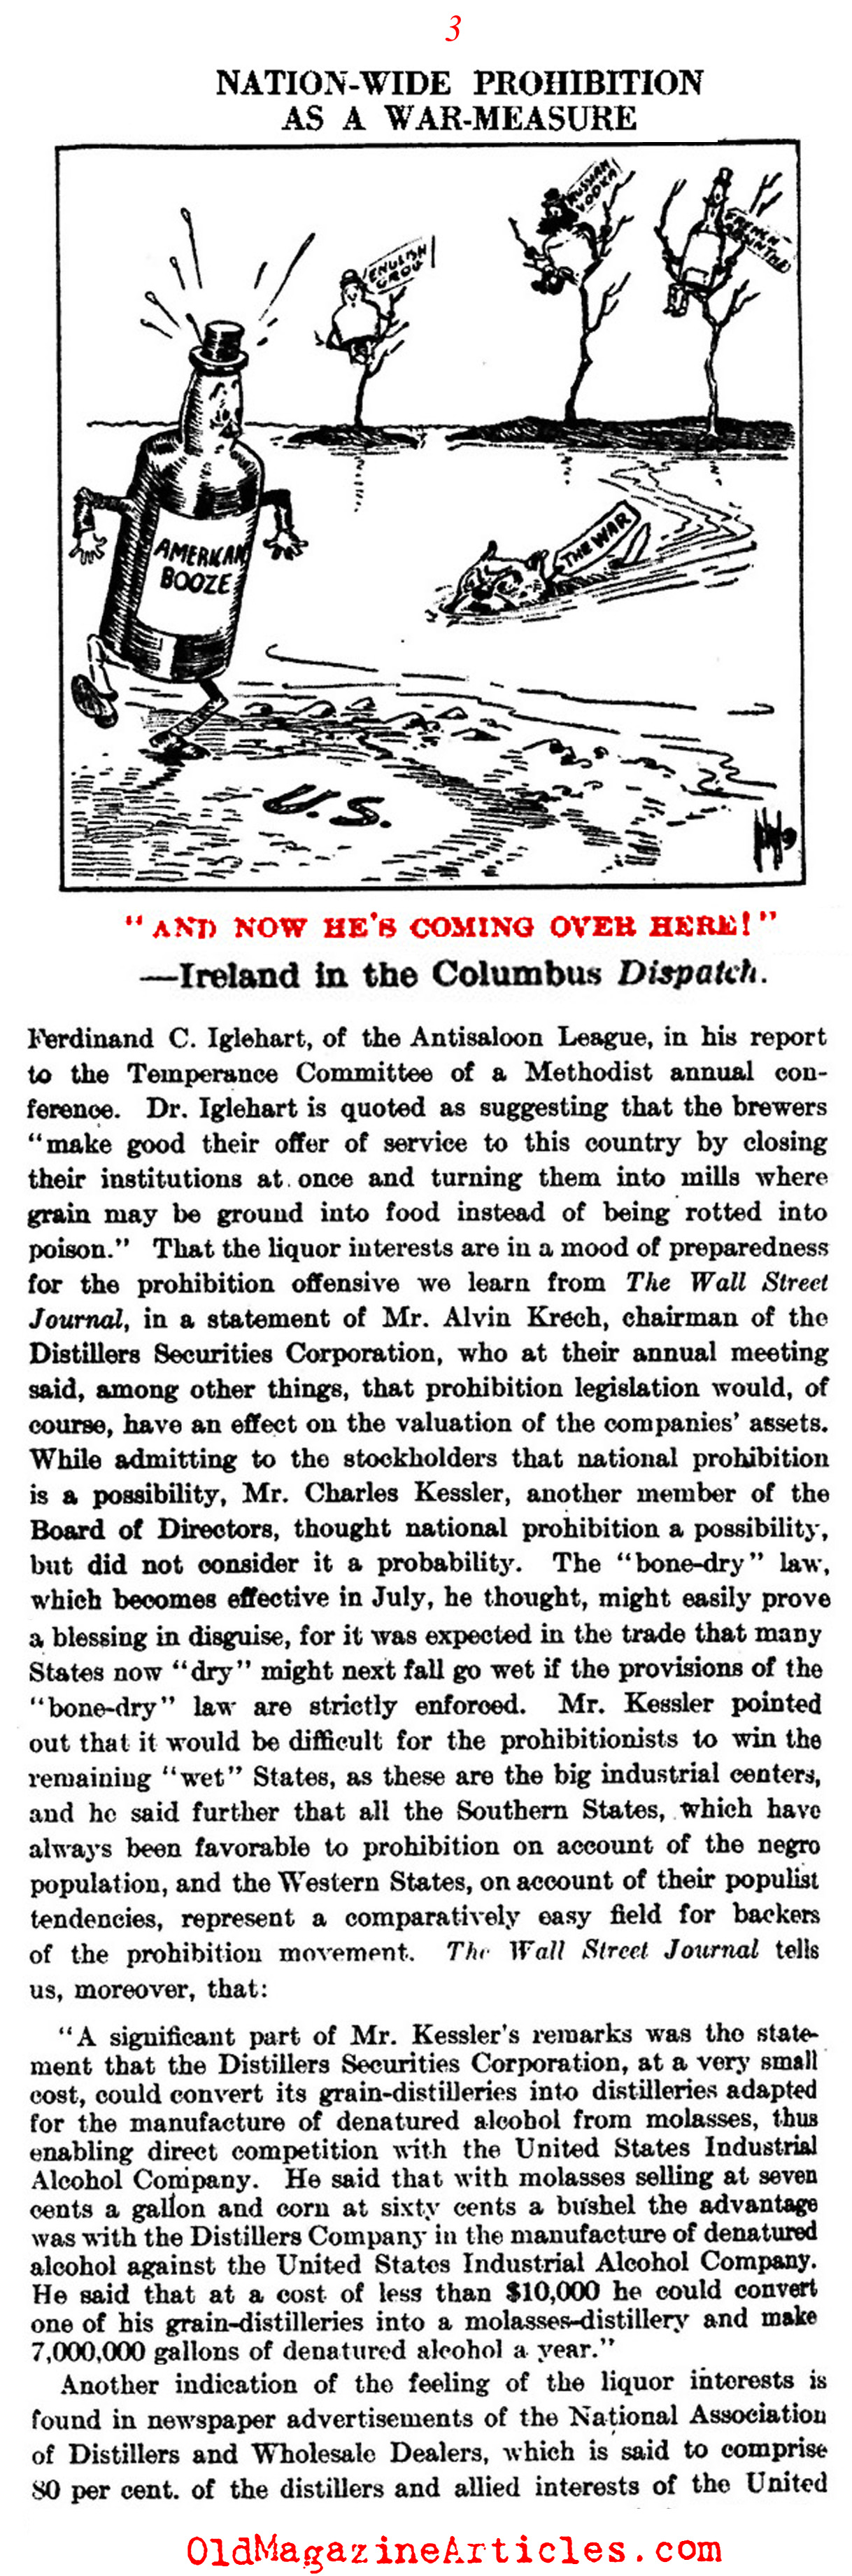 W.W. I and the Advancement of Prohibition (Literary Digest, 1916)